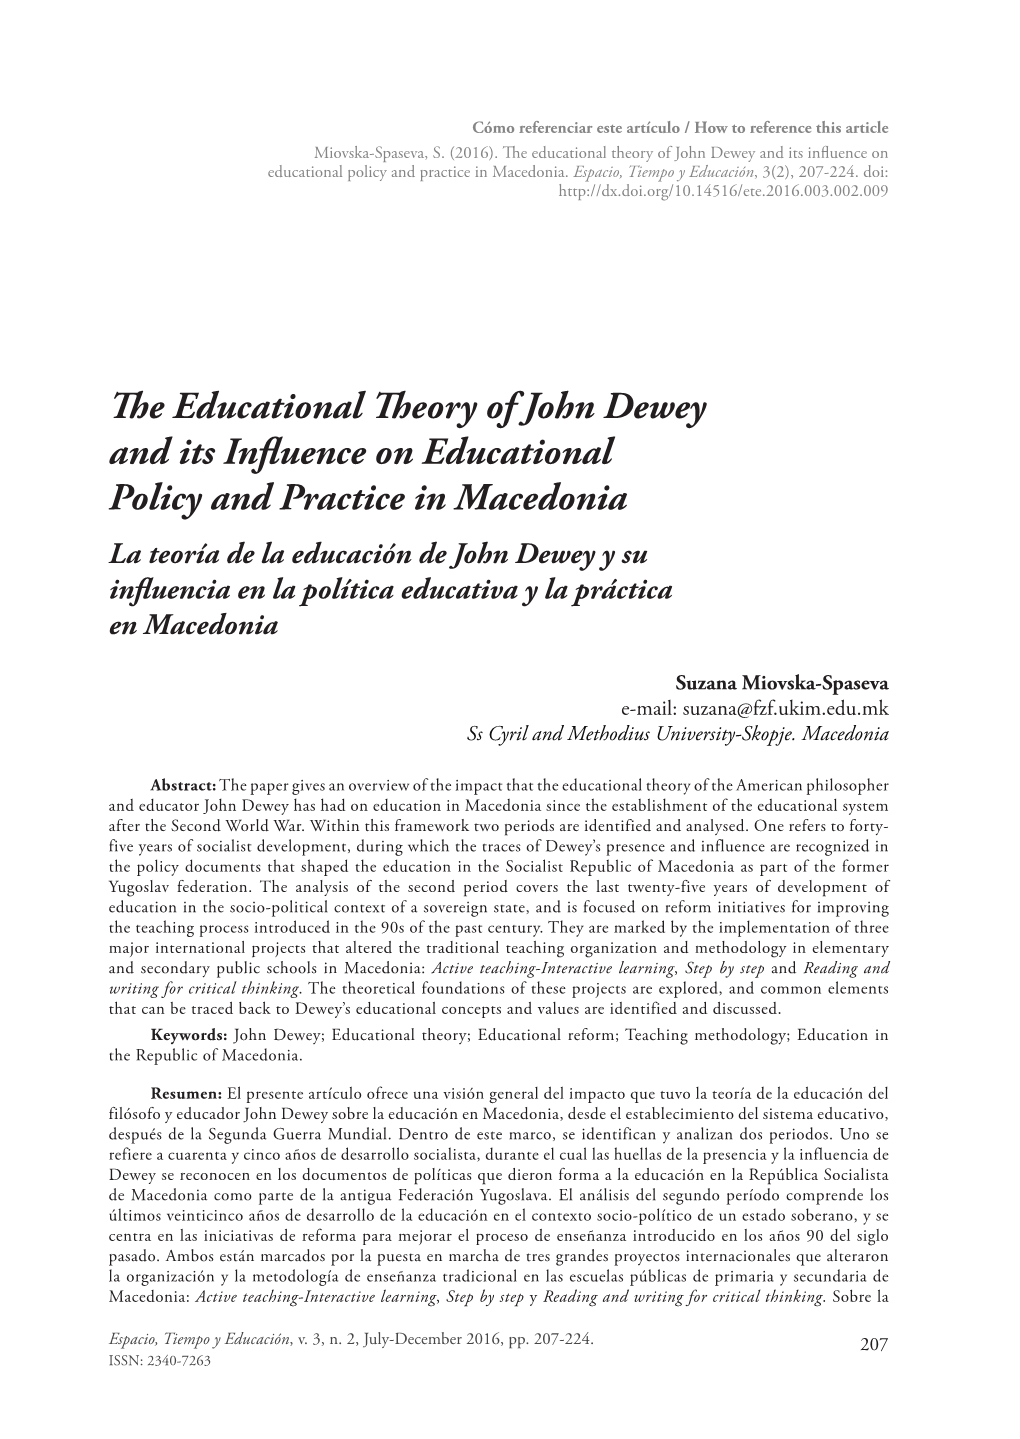 The Educational Theory of John Dewey and Its Influence on Educational Policy and Practice in Macedonia